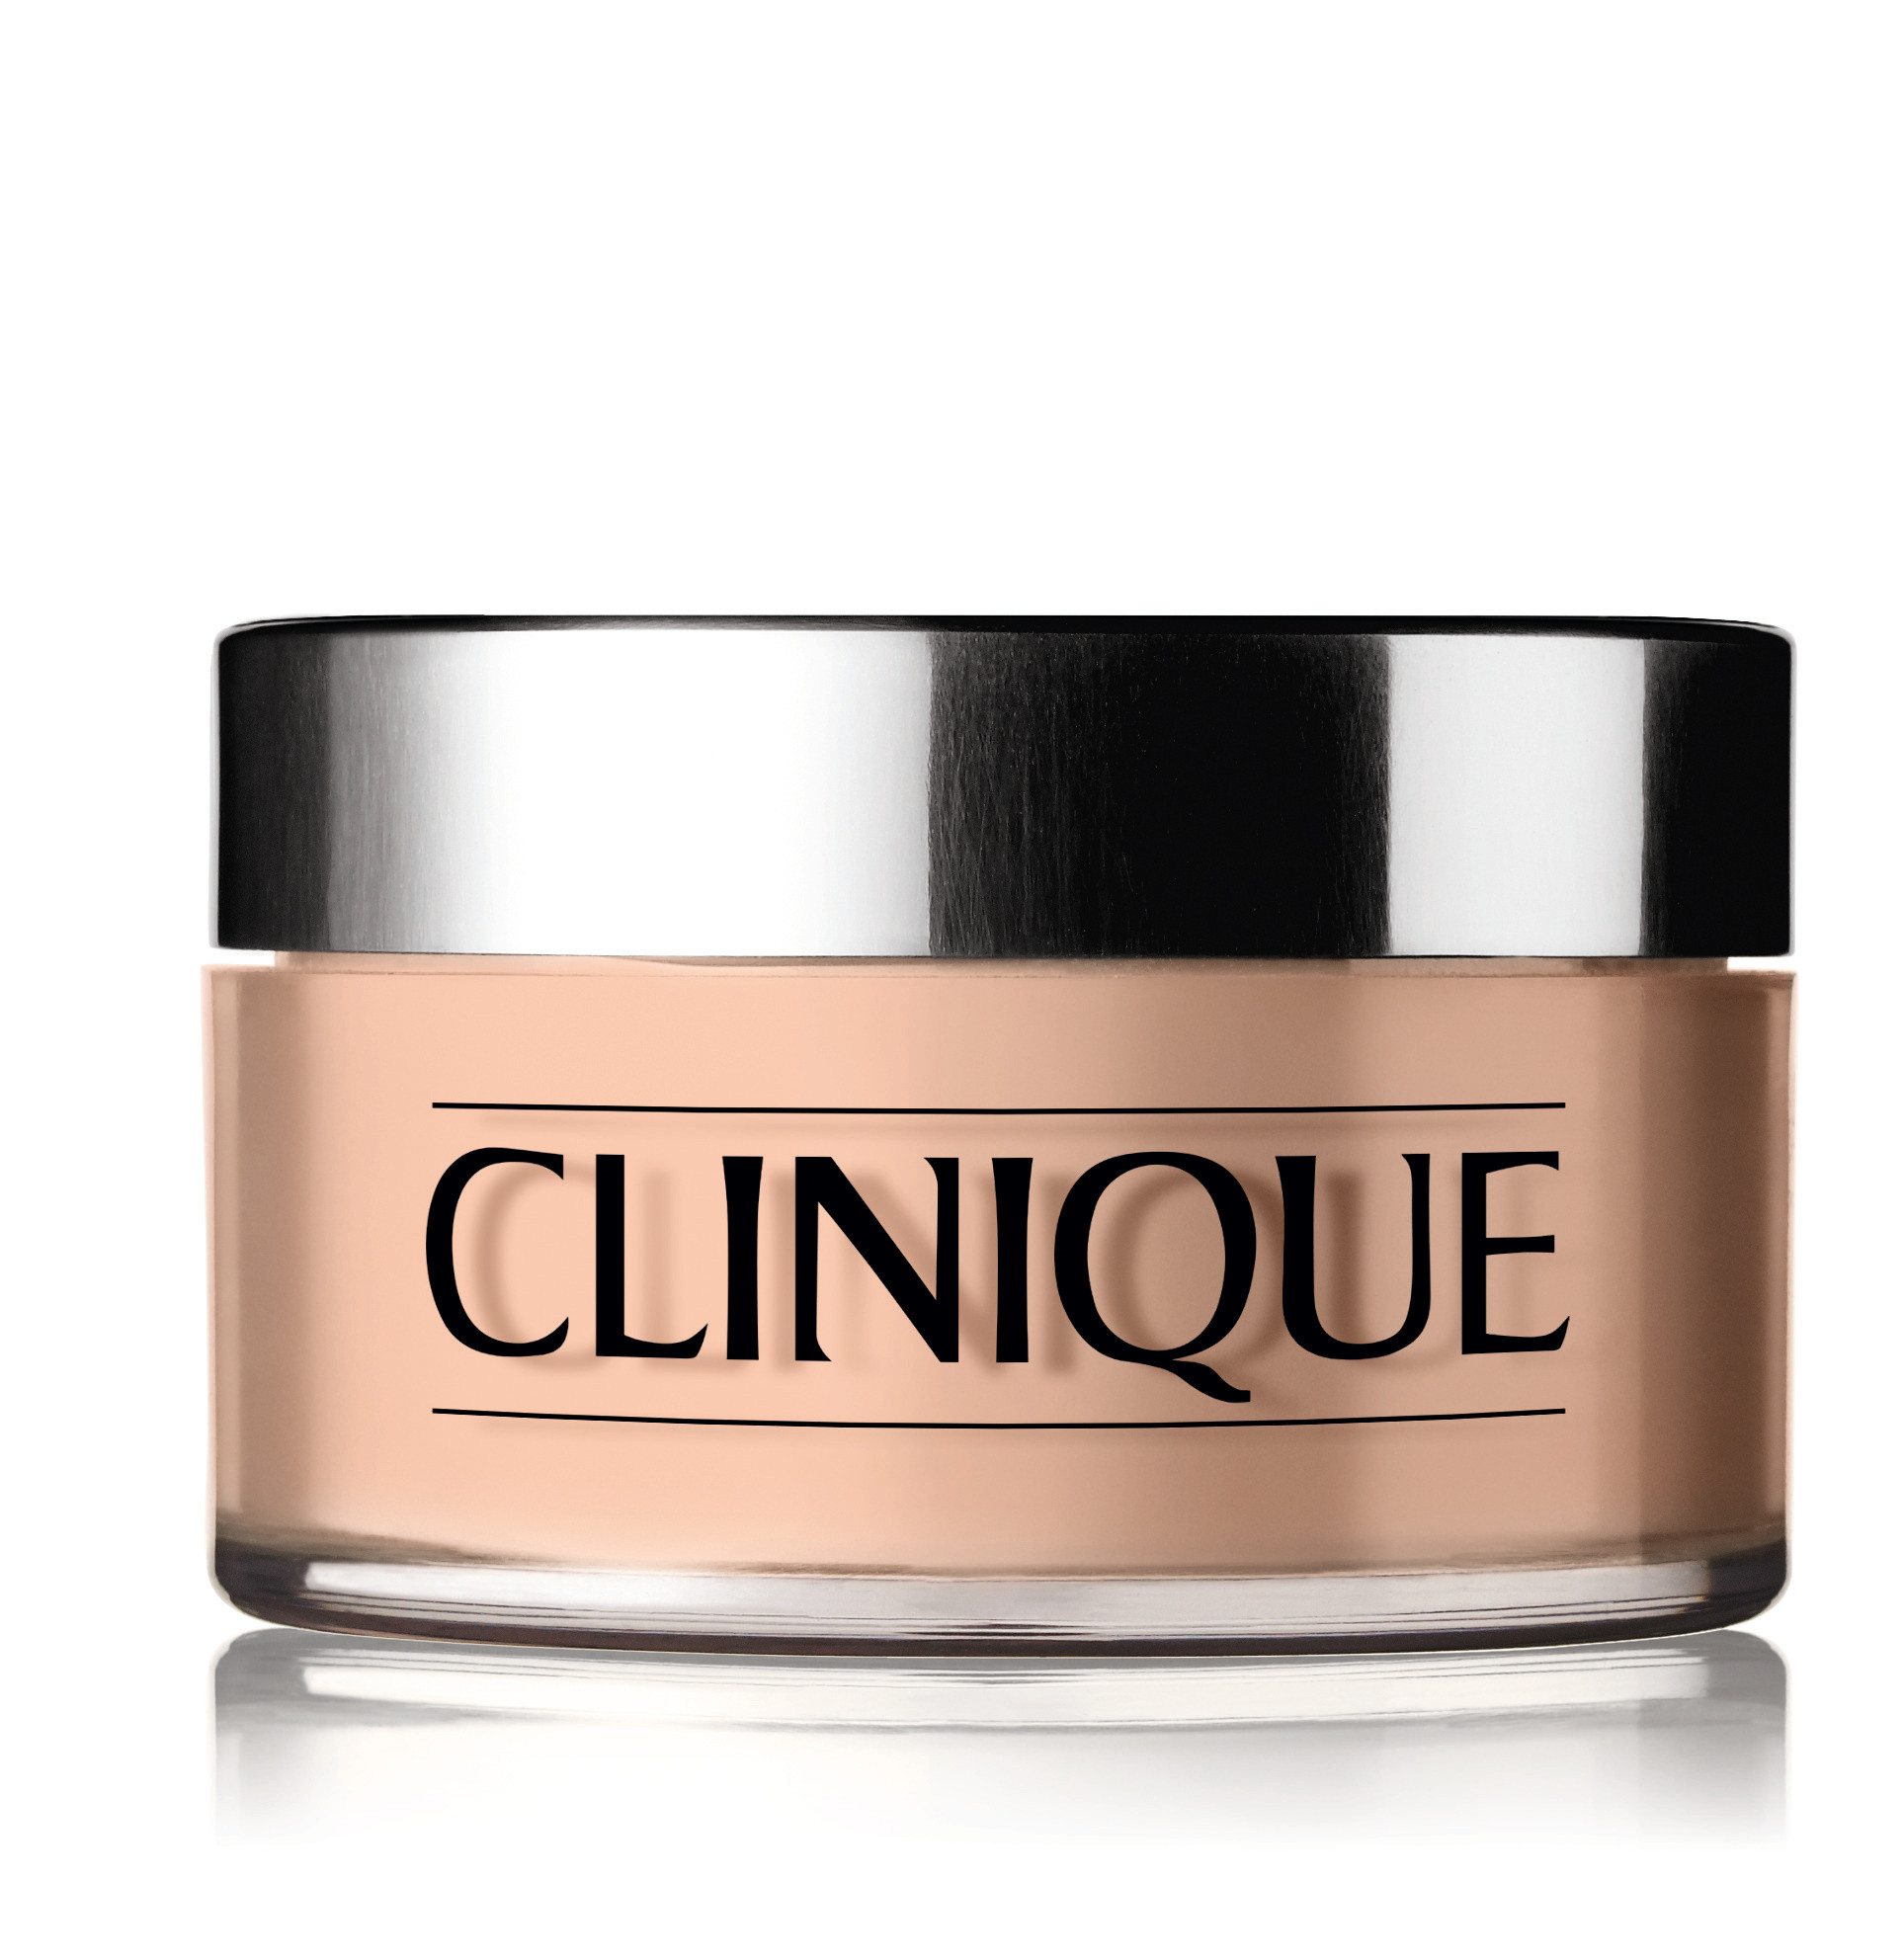 CLINIQUE BLENDED FACE POWDER TRASPARENCY 04  - 35 G, 04 CLINIQUE, large image number 0